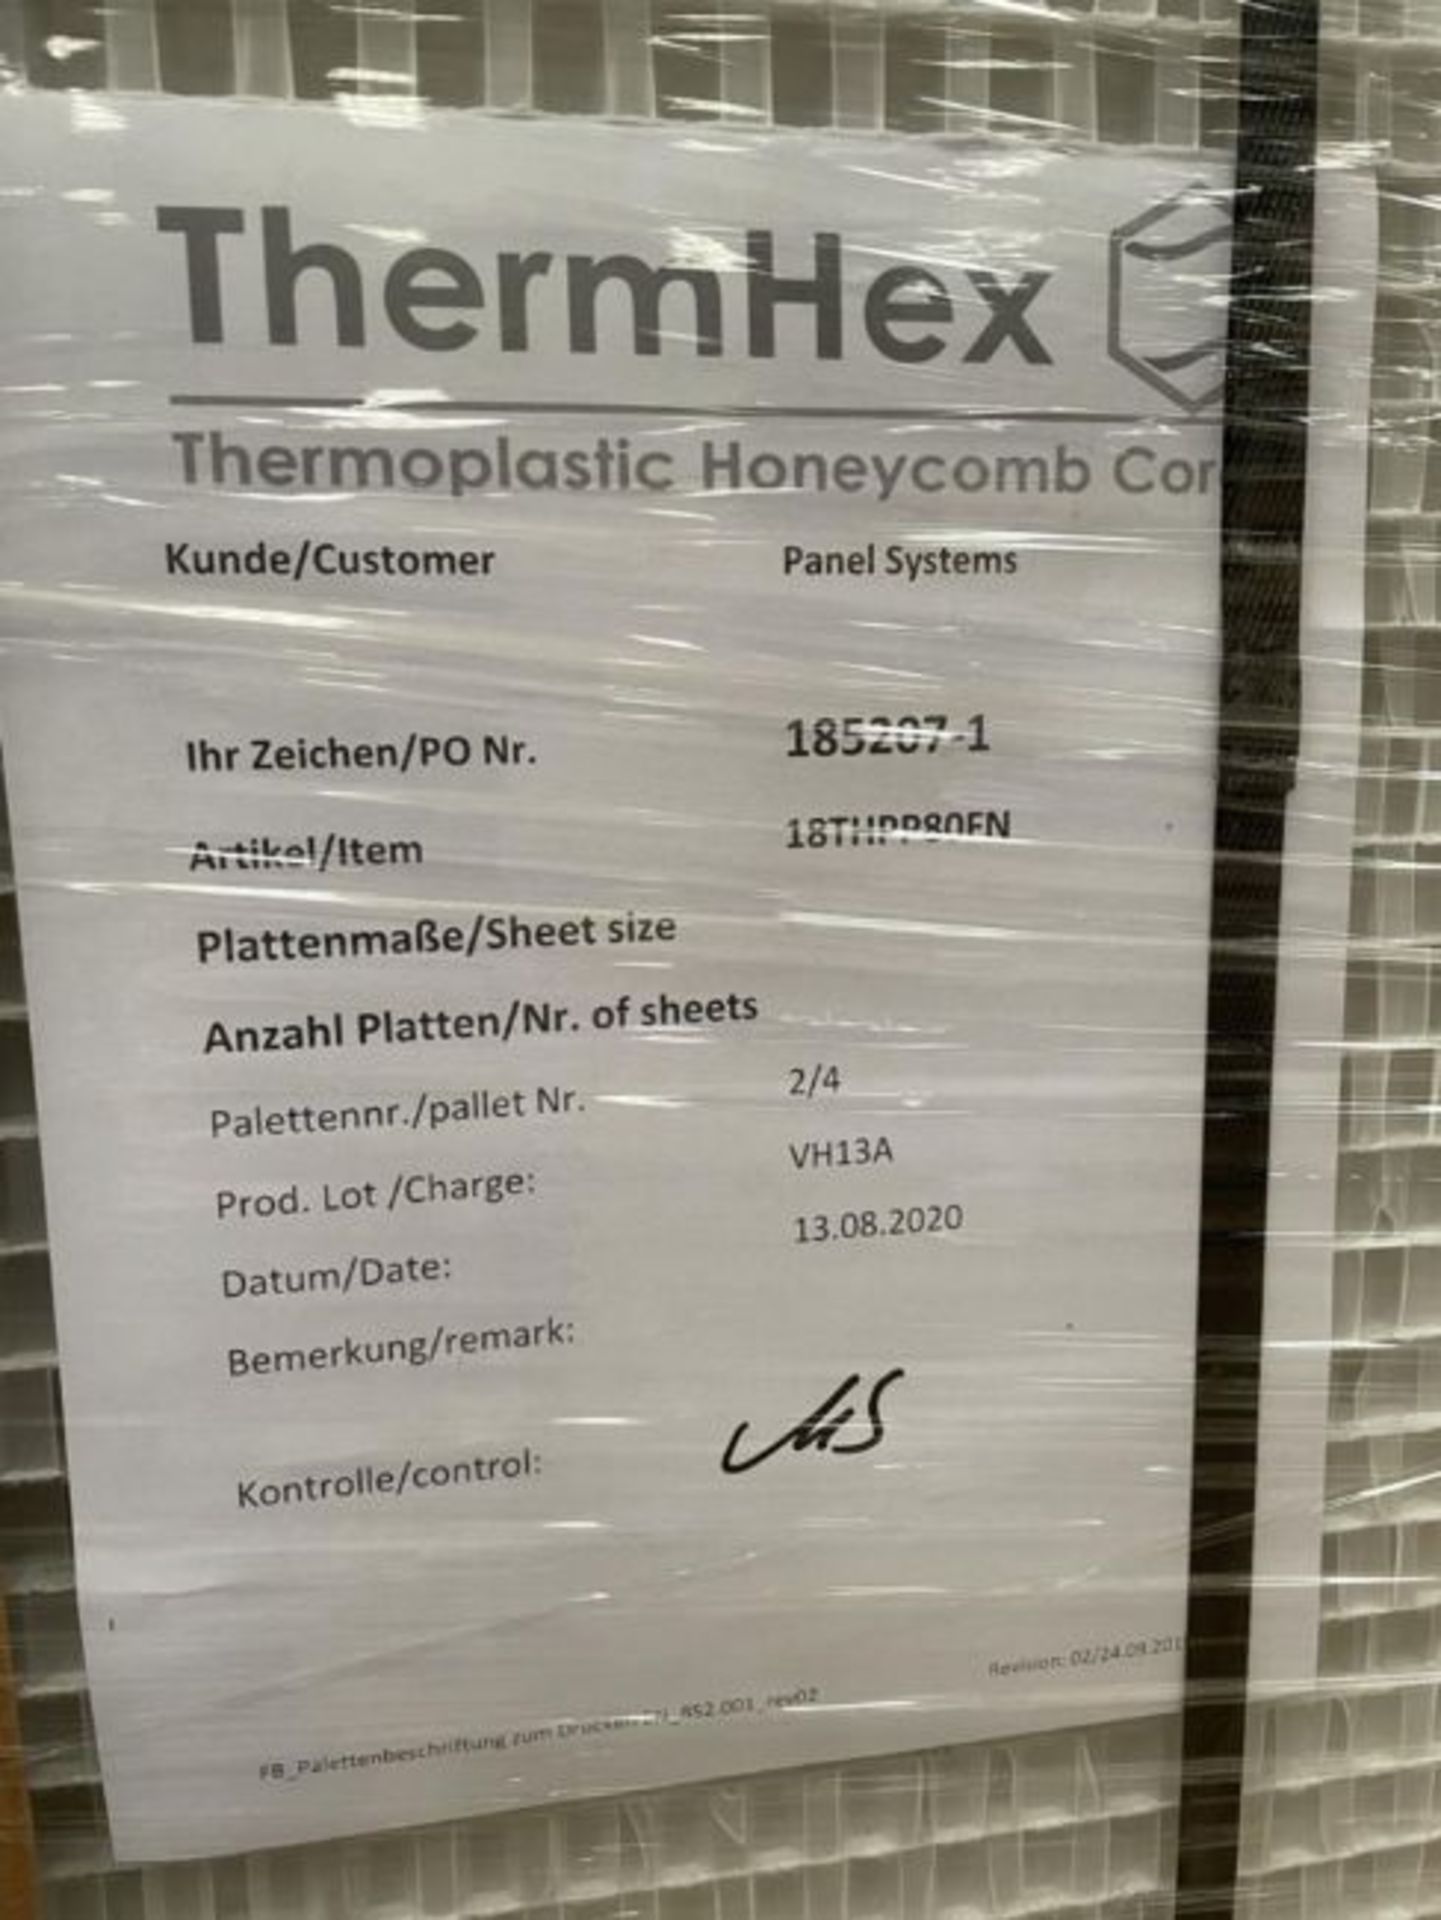 6 x ThermHex Thermoplastic Honeycomb Core Panels - Size 693 x 1210 x 20mm - New Stock - - Image 9 of 10